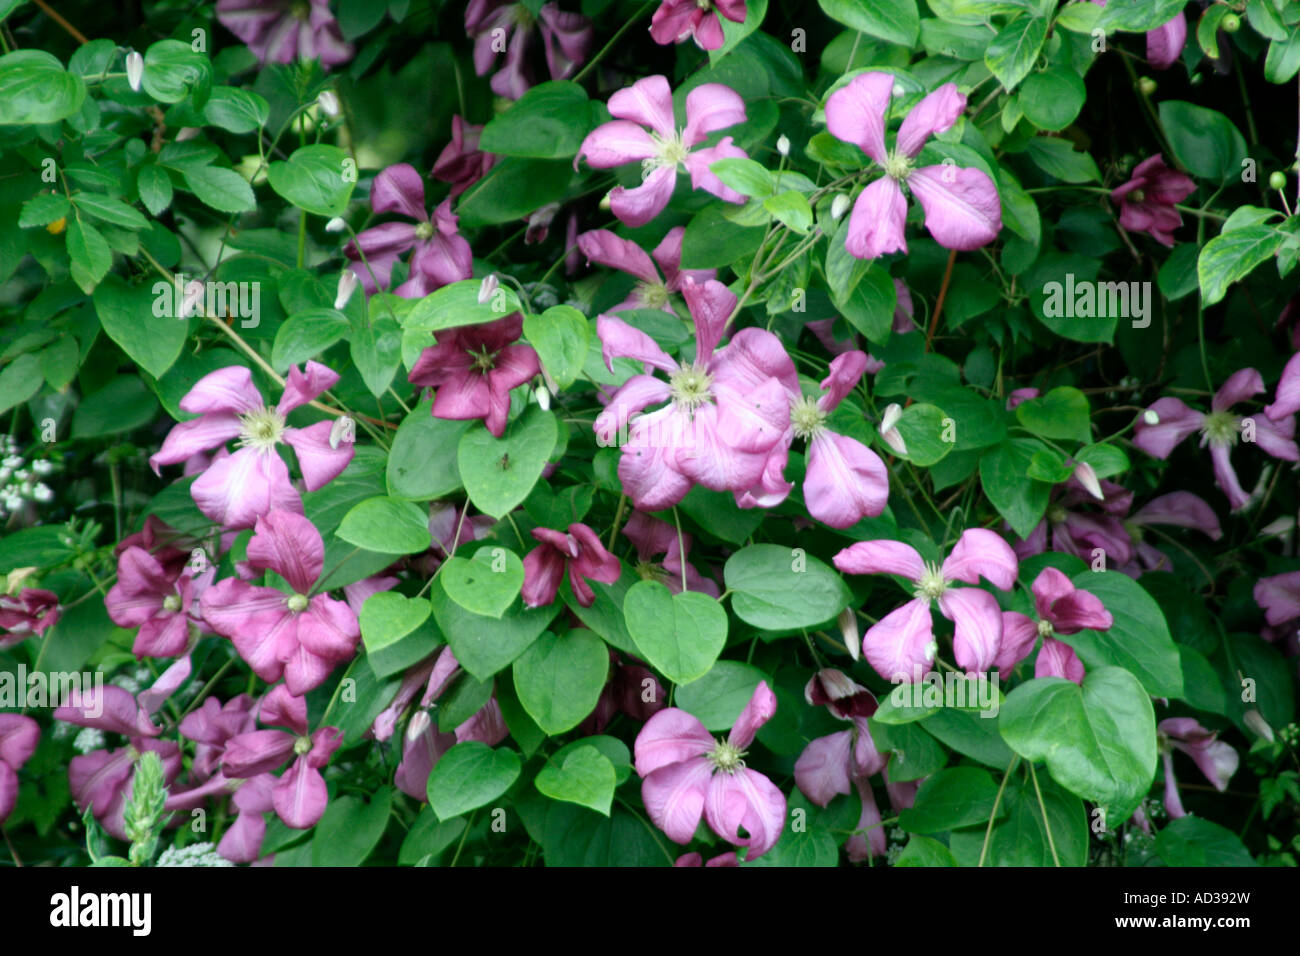 Clematis Margot Koster early June Stock Photo